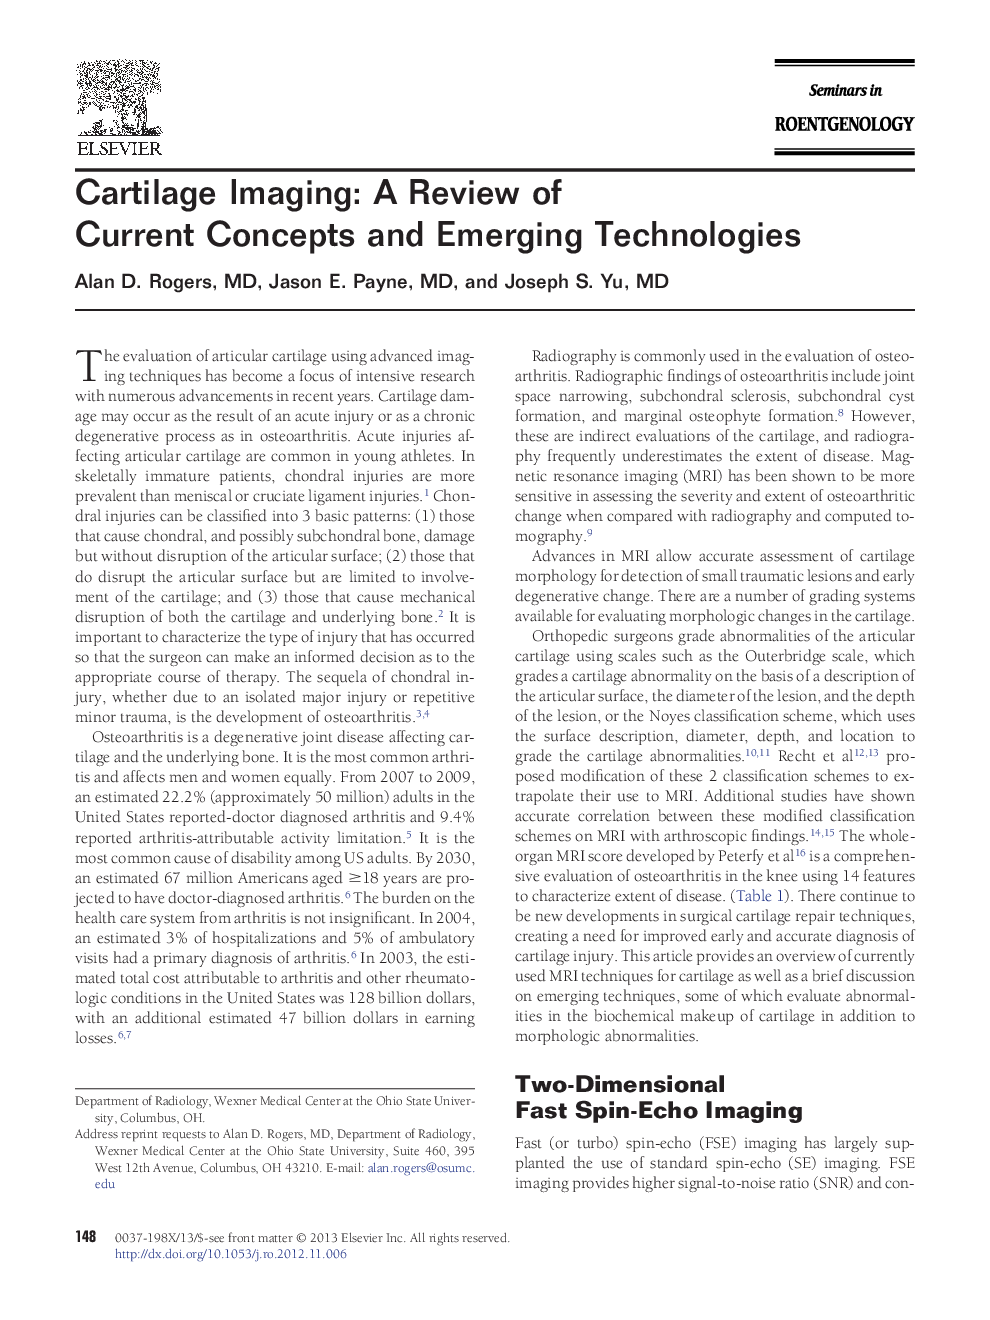 Cartilage Imaging: A Review of Current Concepts and Emerging Technologies